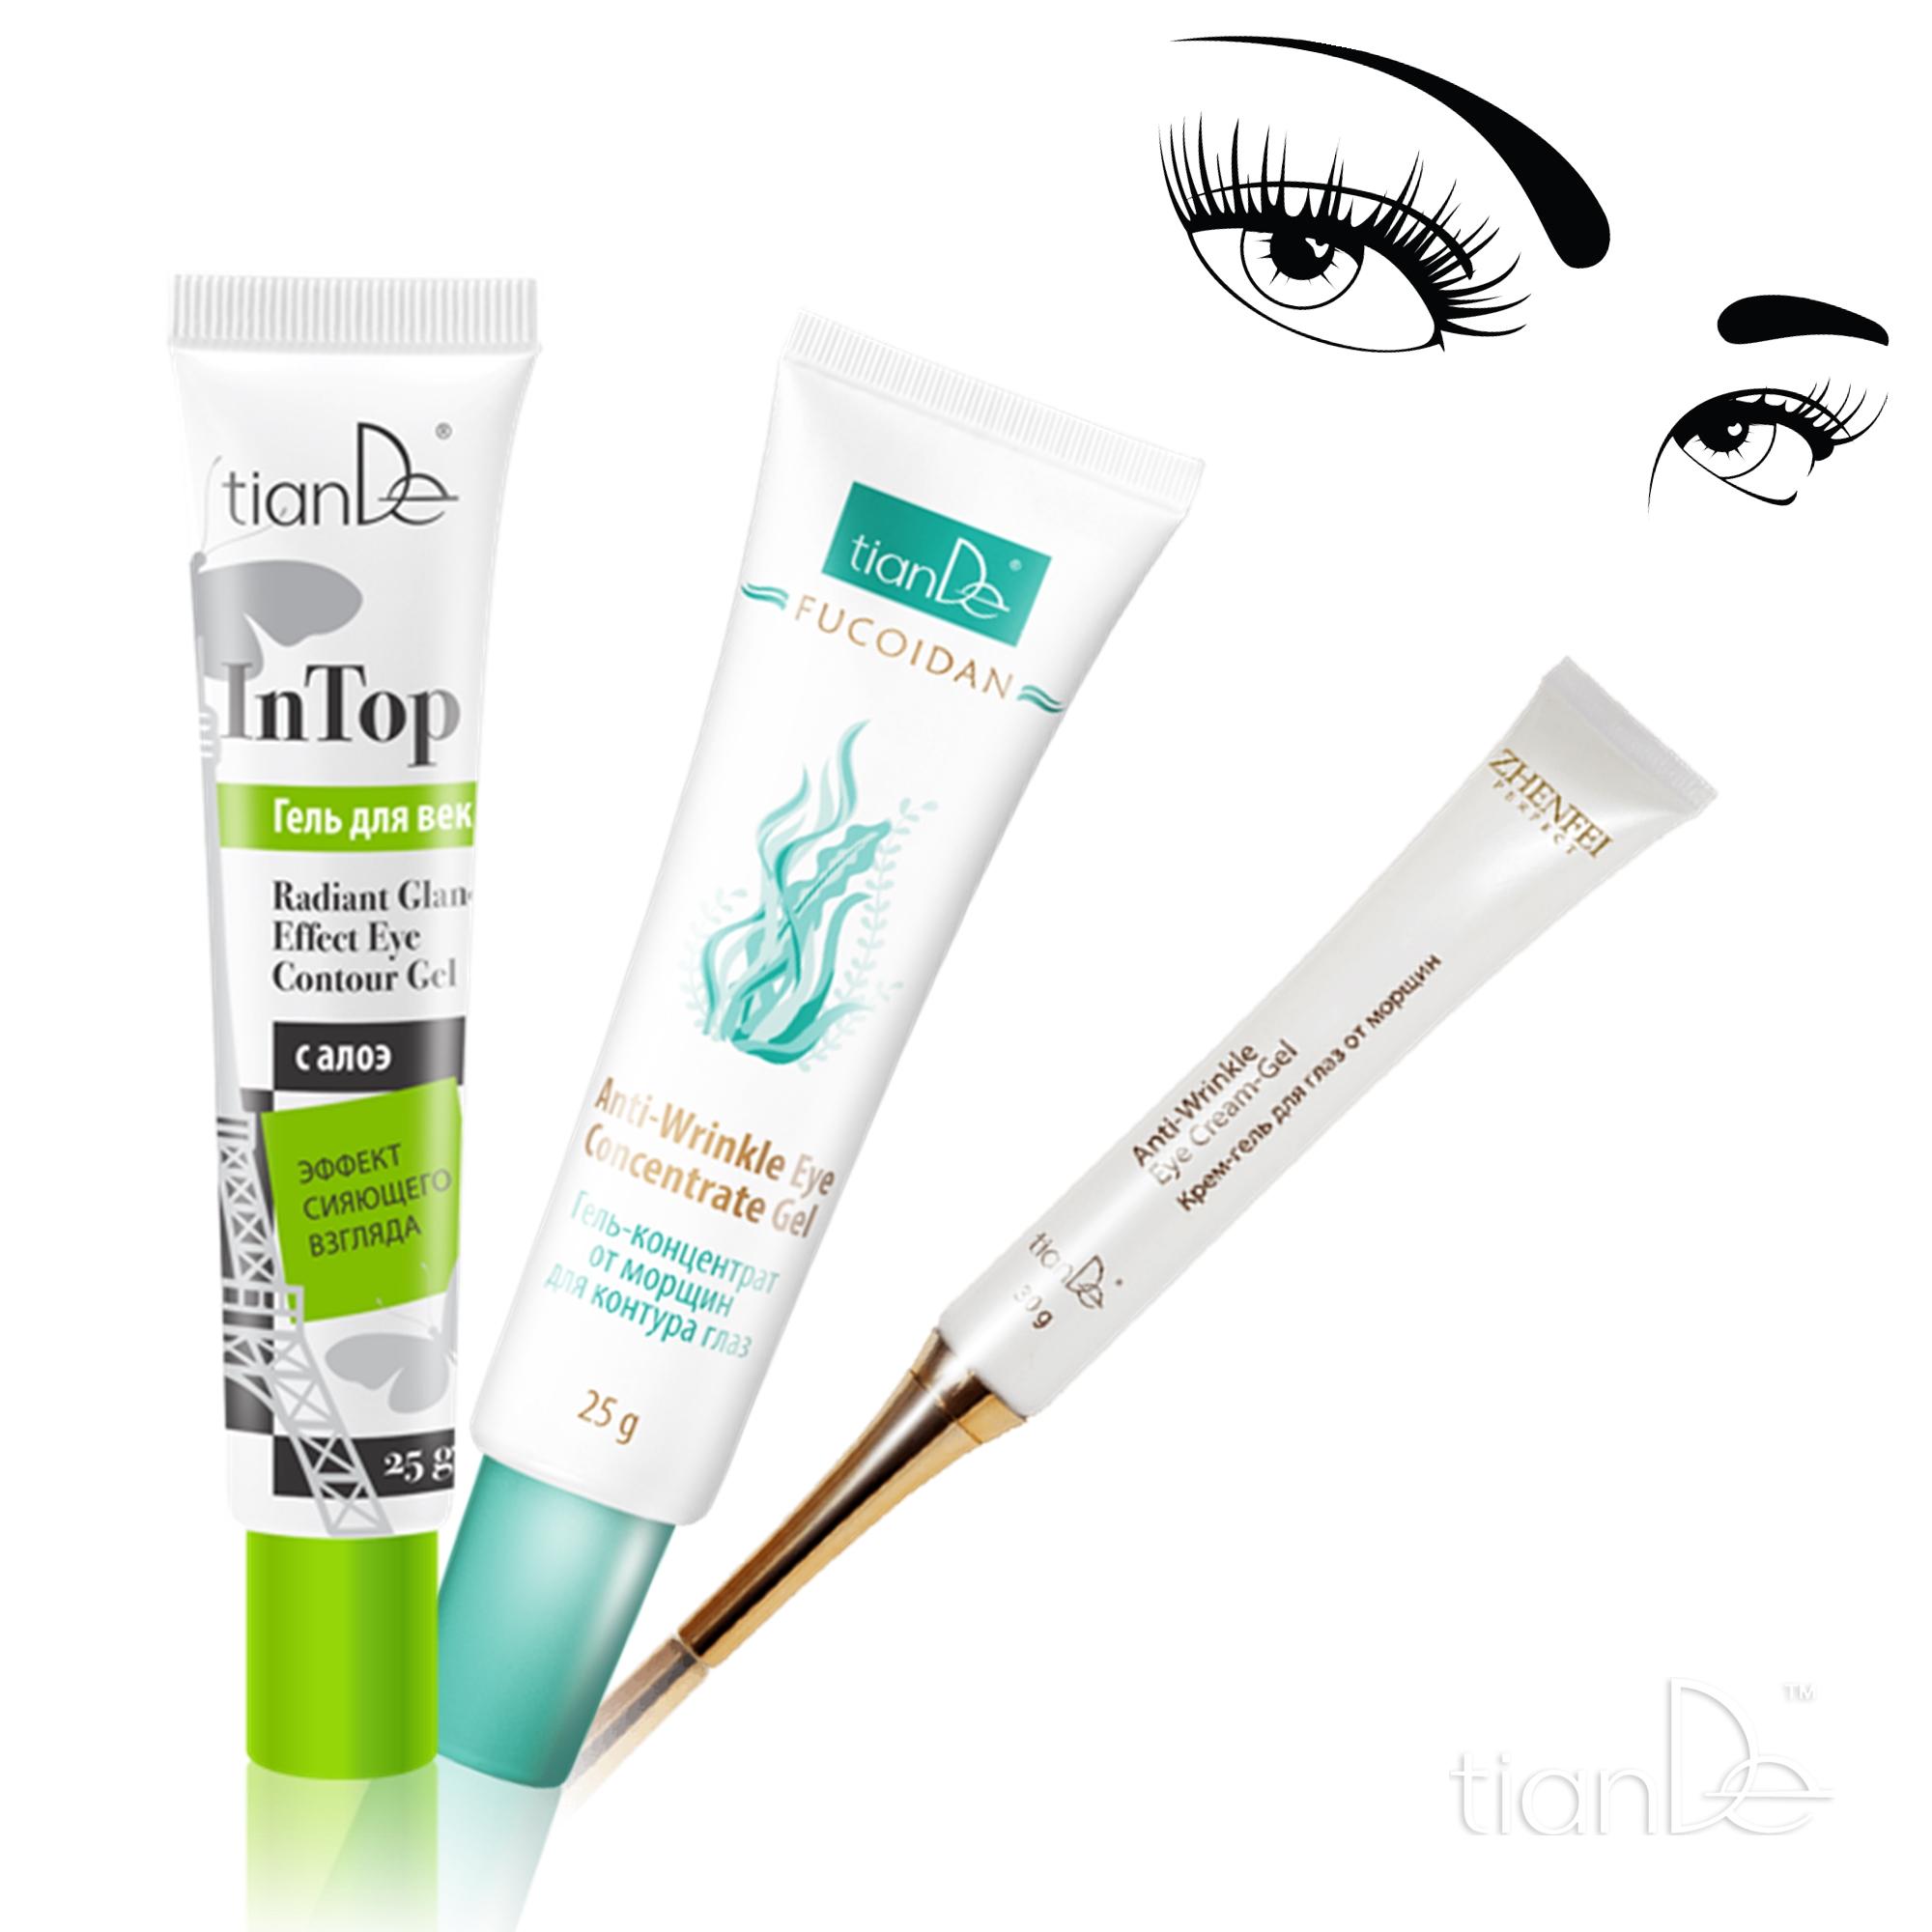 Eye Products